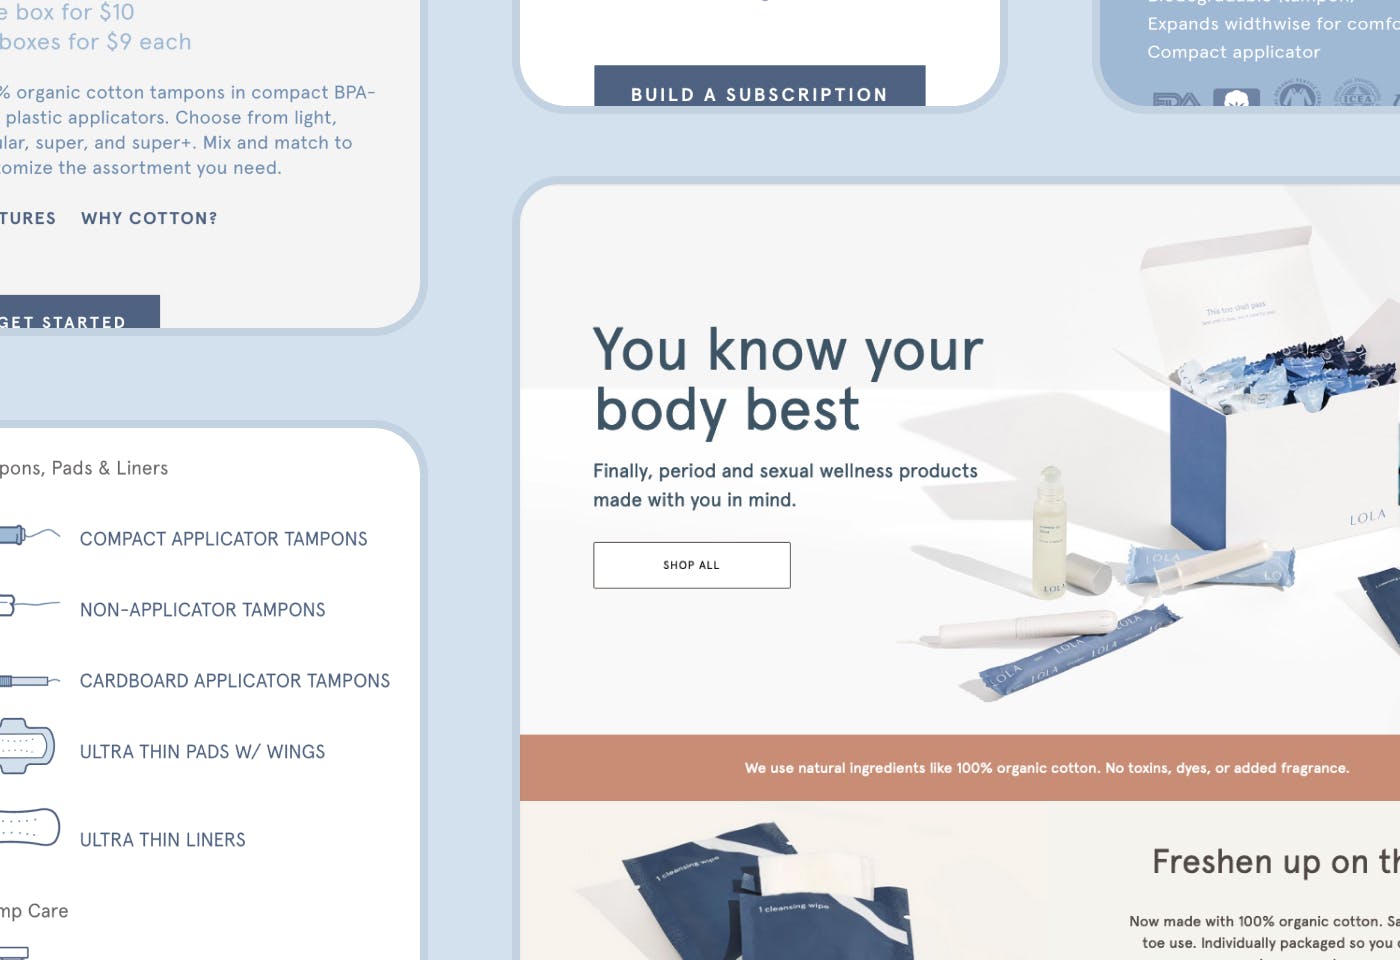 Screenshots of the Lola website product arranged in a grid. The main text is "You know your body best"